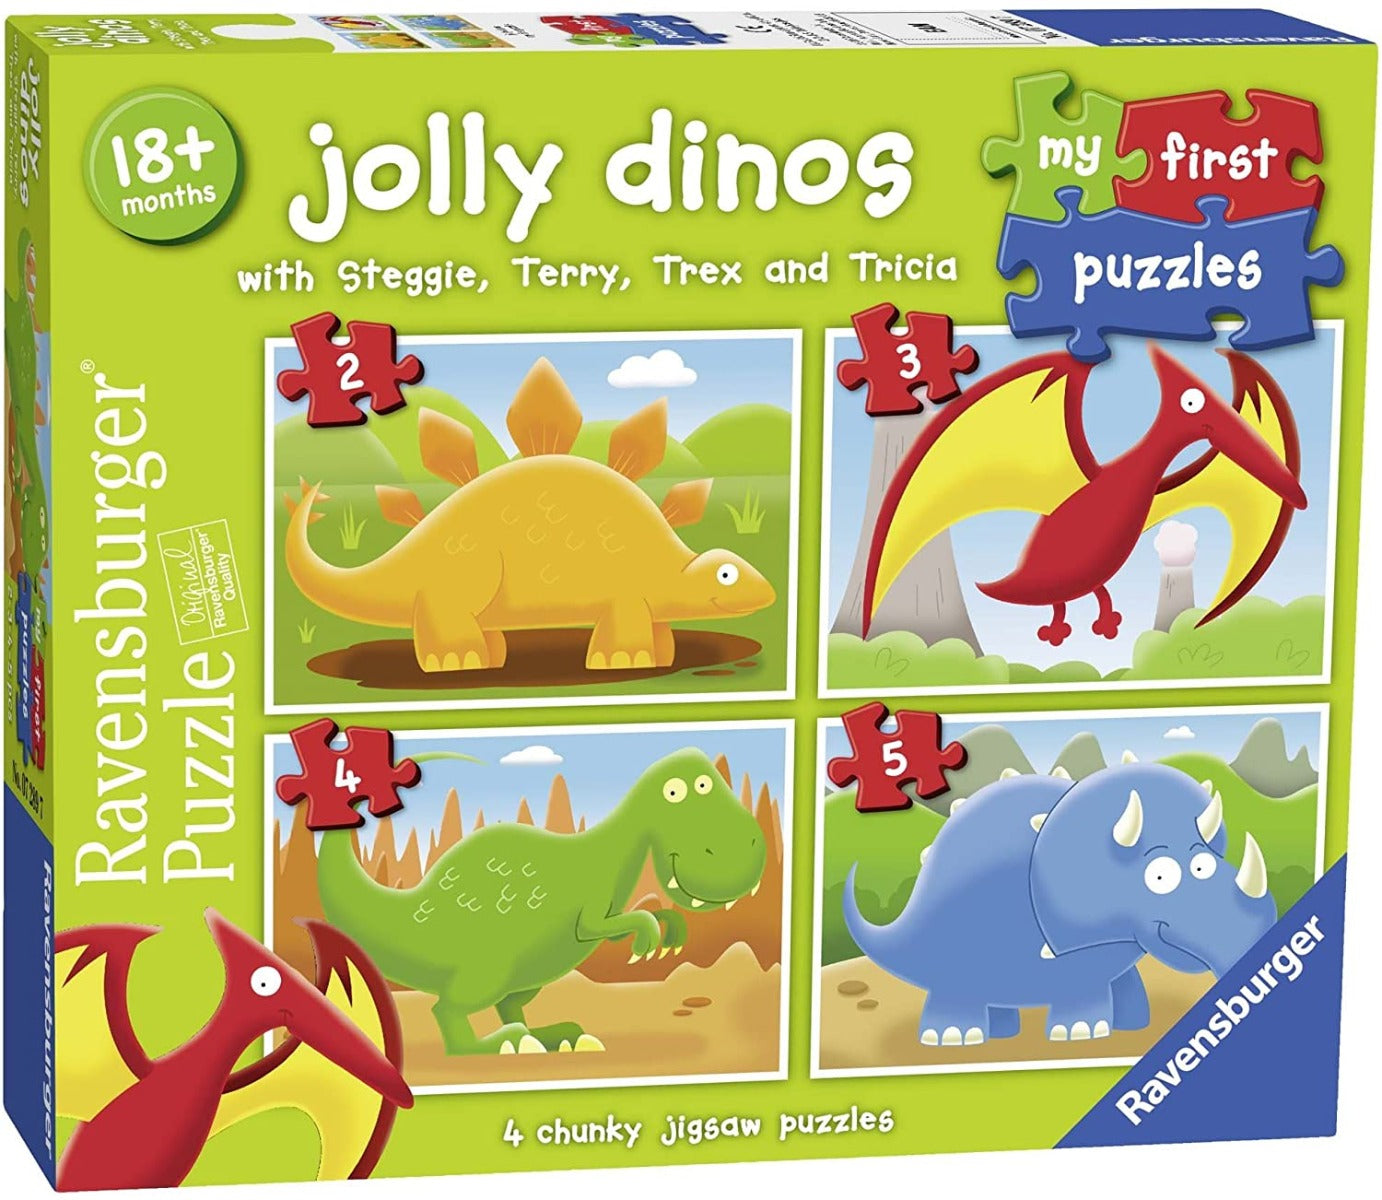 Ravensburger - Jolly Dinos My First Puzzles -  2, 3, 4 and 5 Piece Jigsaw Puzzles